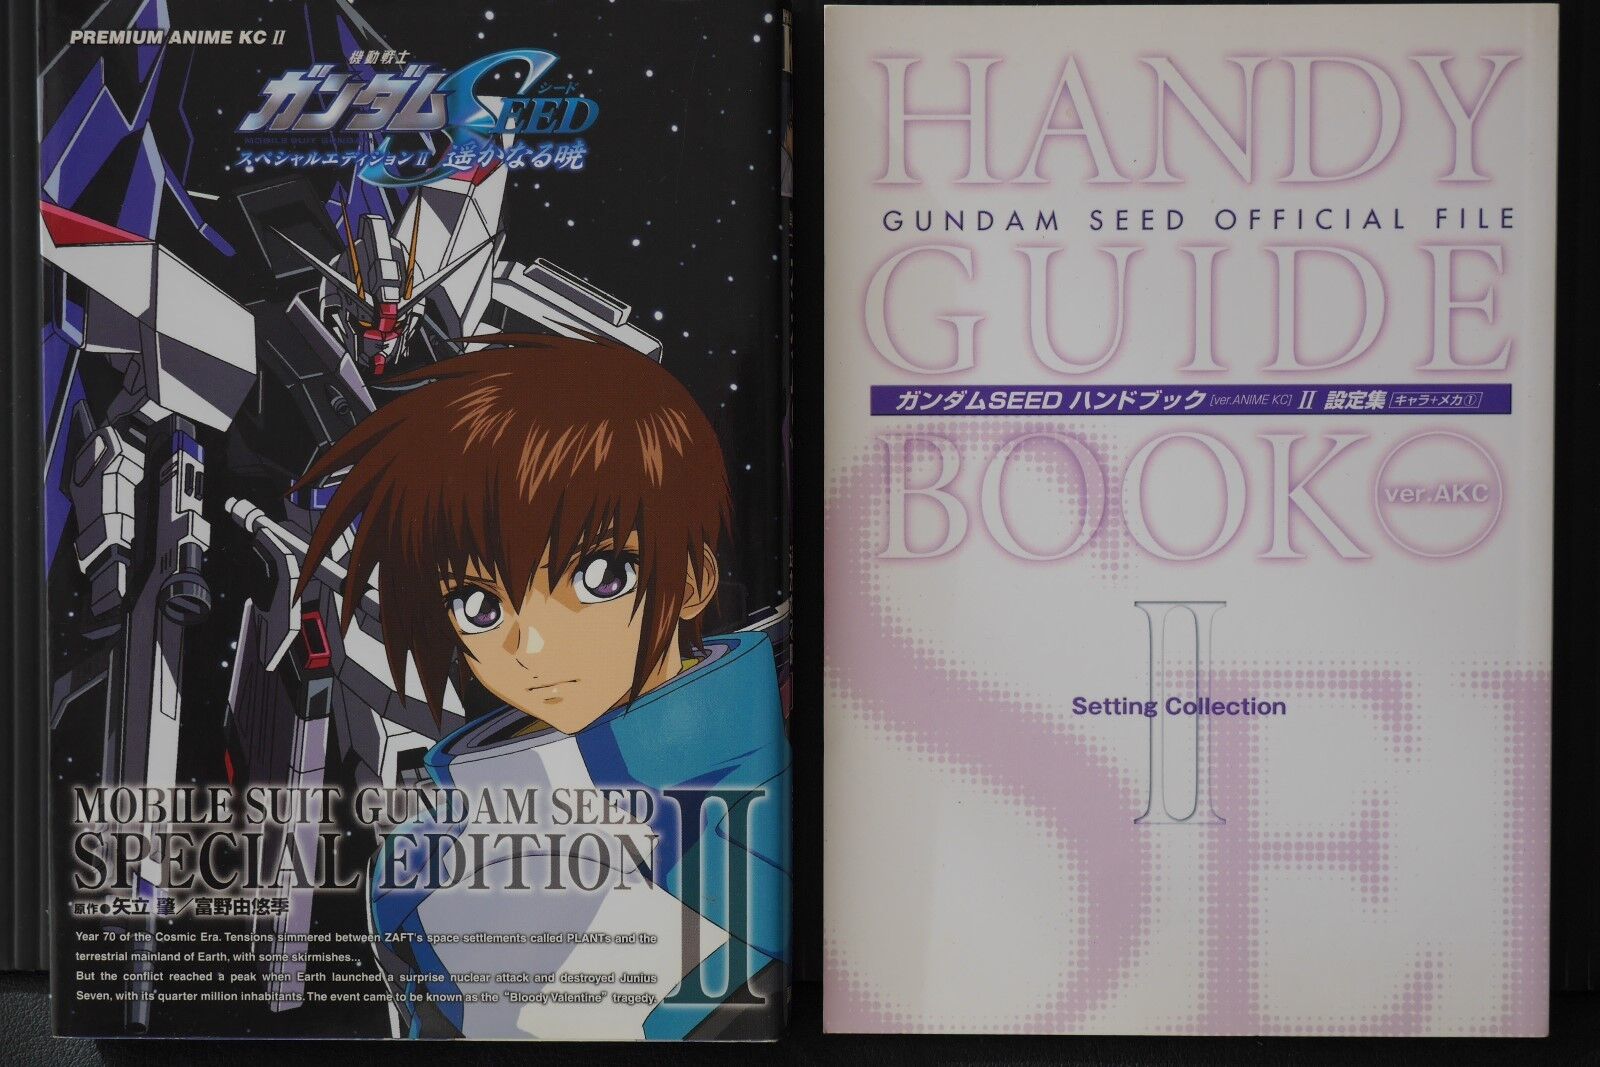 Anime Comic: Mobile Suit Gundam SEED Special Edition 3 JAPAN